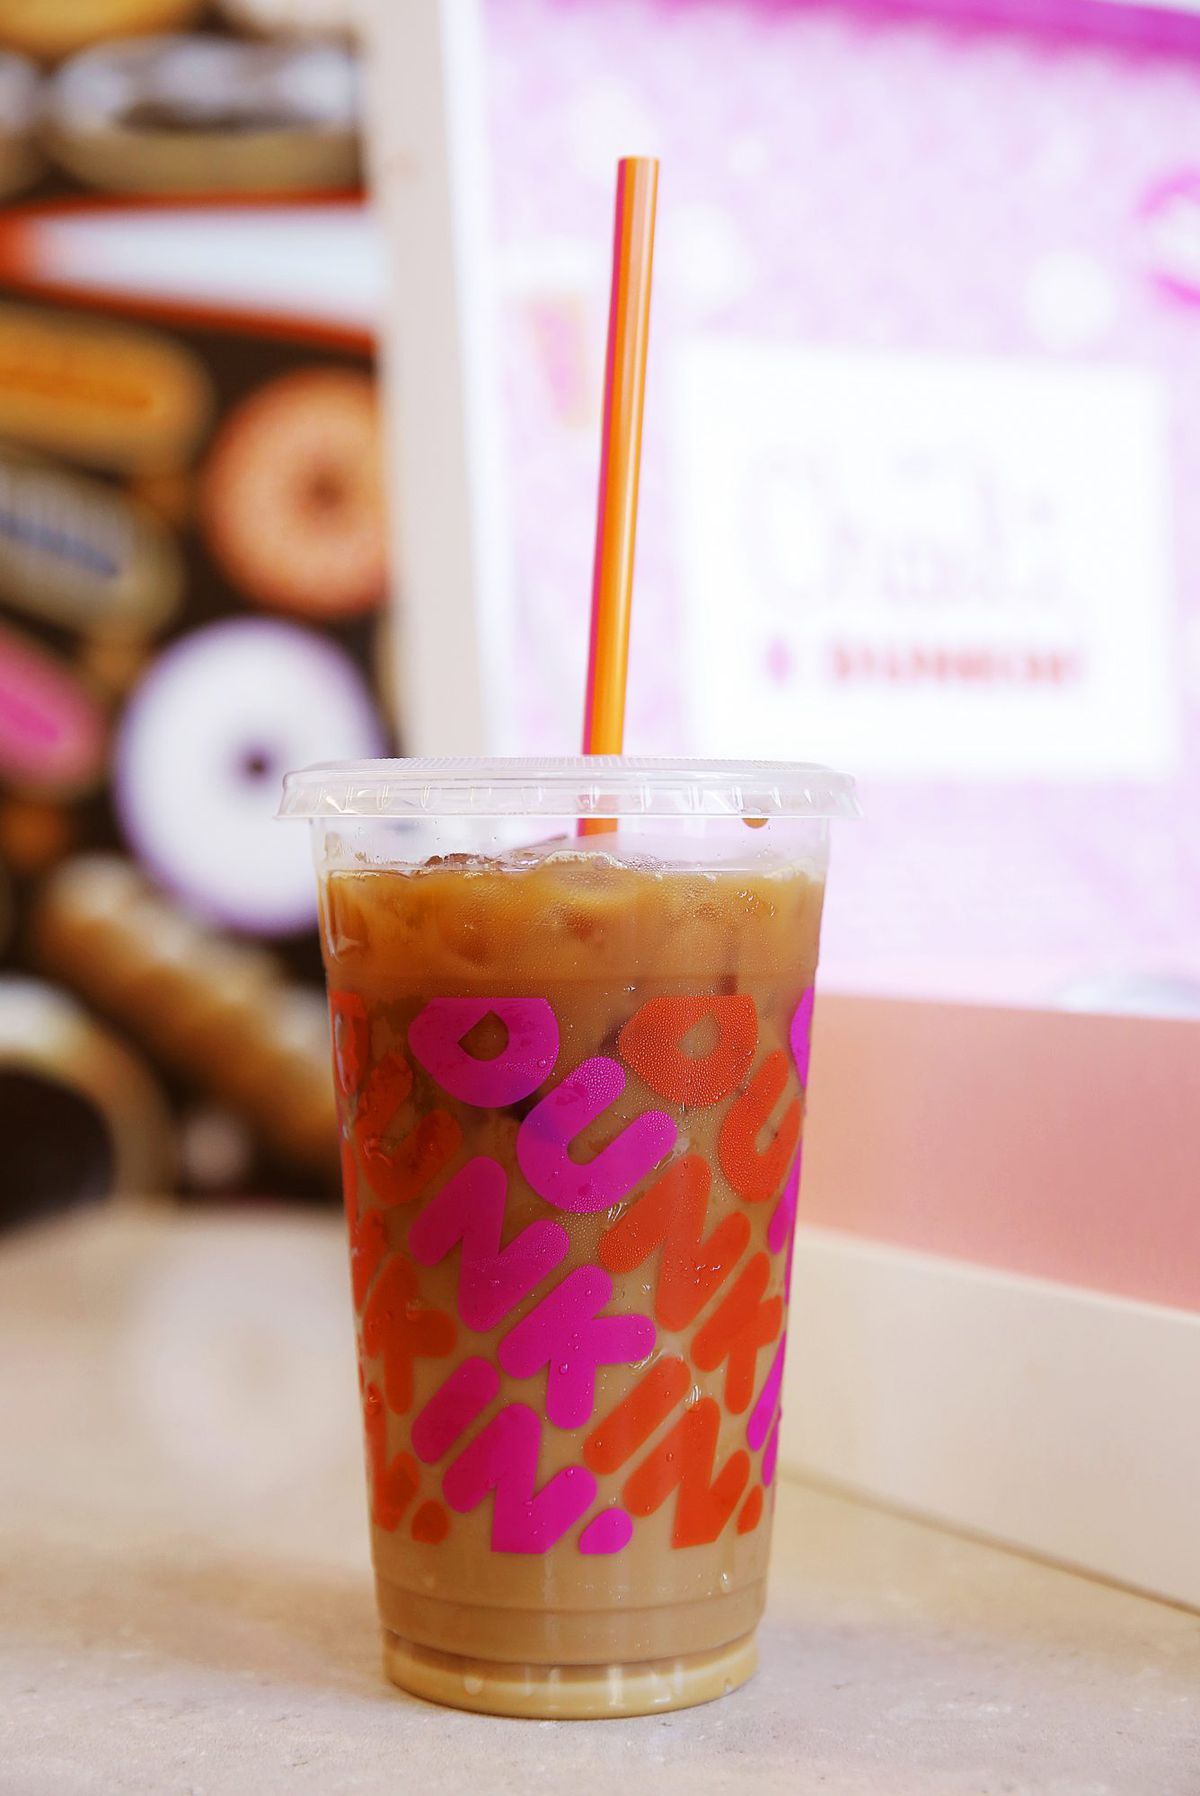 WOODLAND HILLS, CALIFORNIA - AUGUST 31: Dunkin' Launches 'The Charli' Drink with Charli D'Amelio on August 31, 2020 in Woodland Hills, California. (Photo by Rachel Murray/Getty Images for Dunkin')